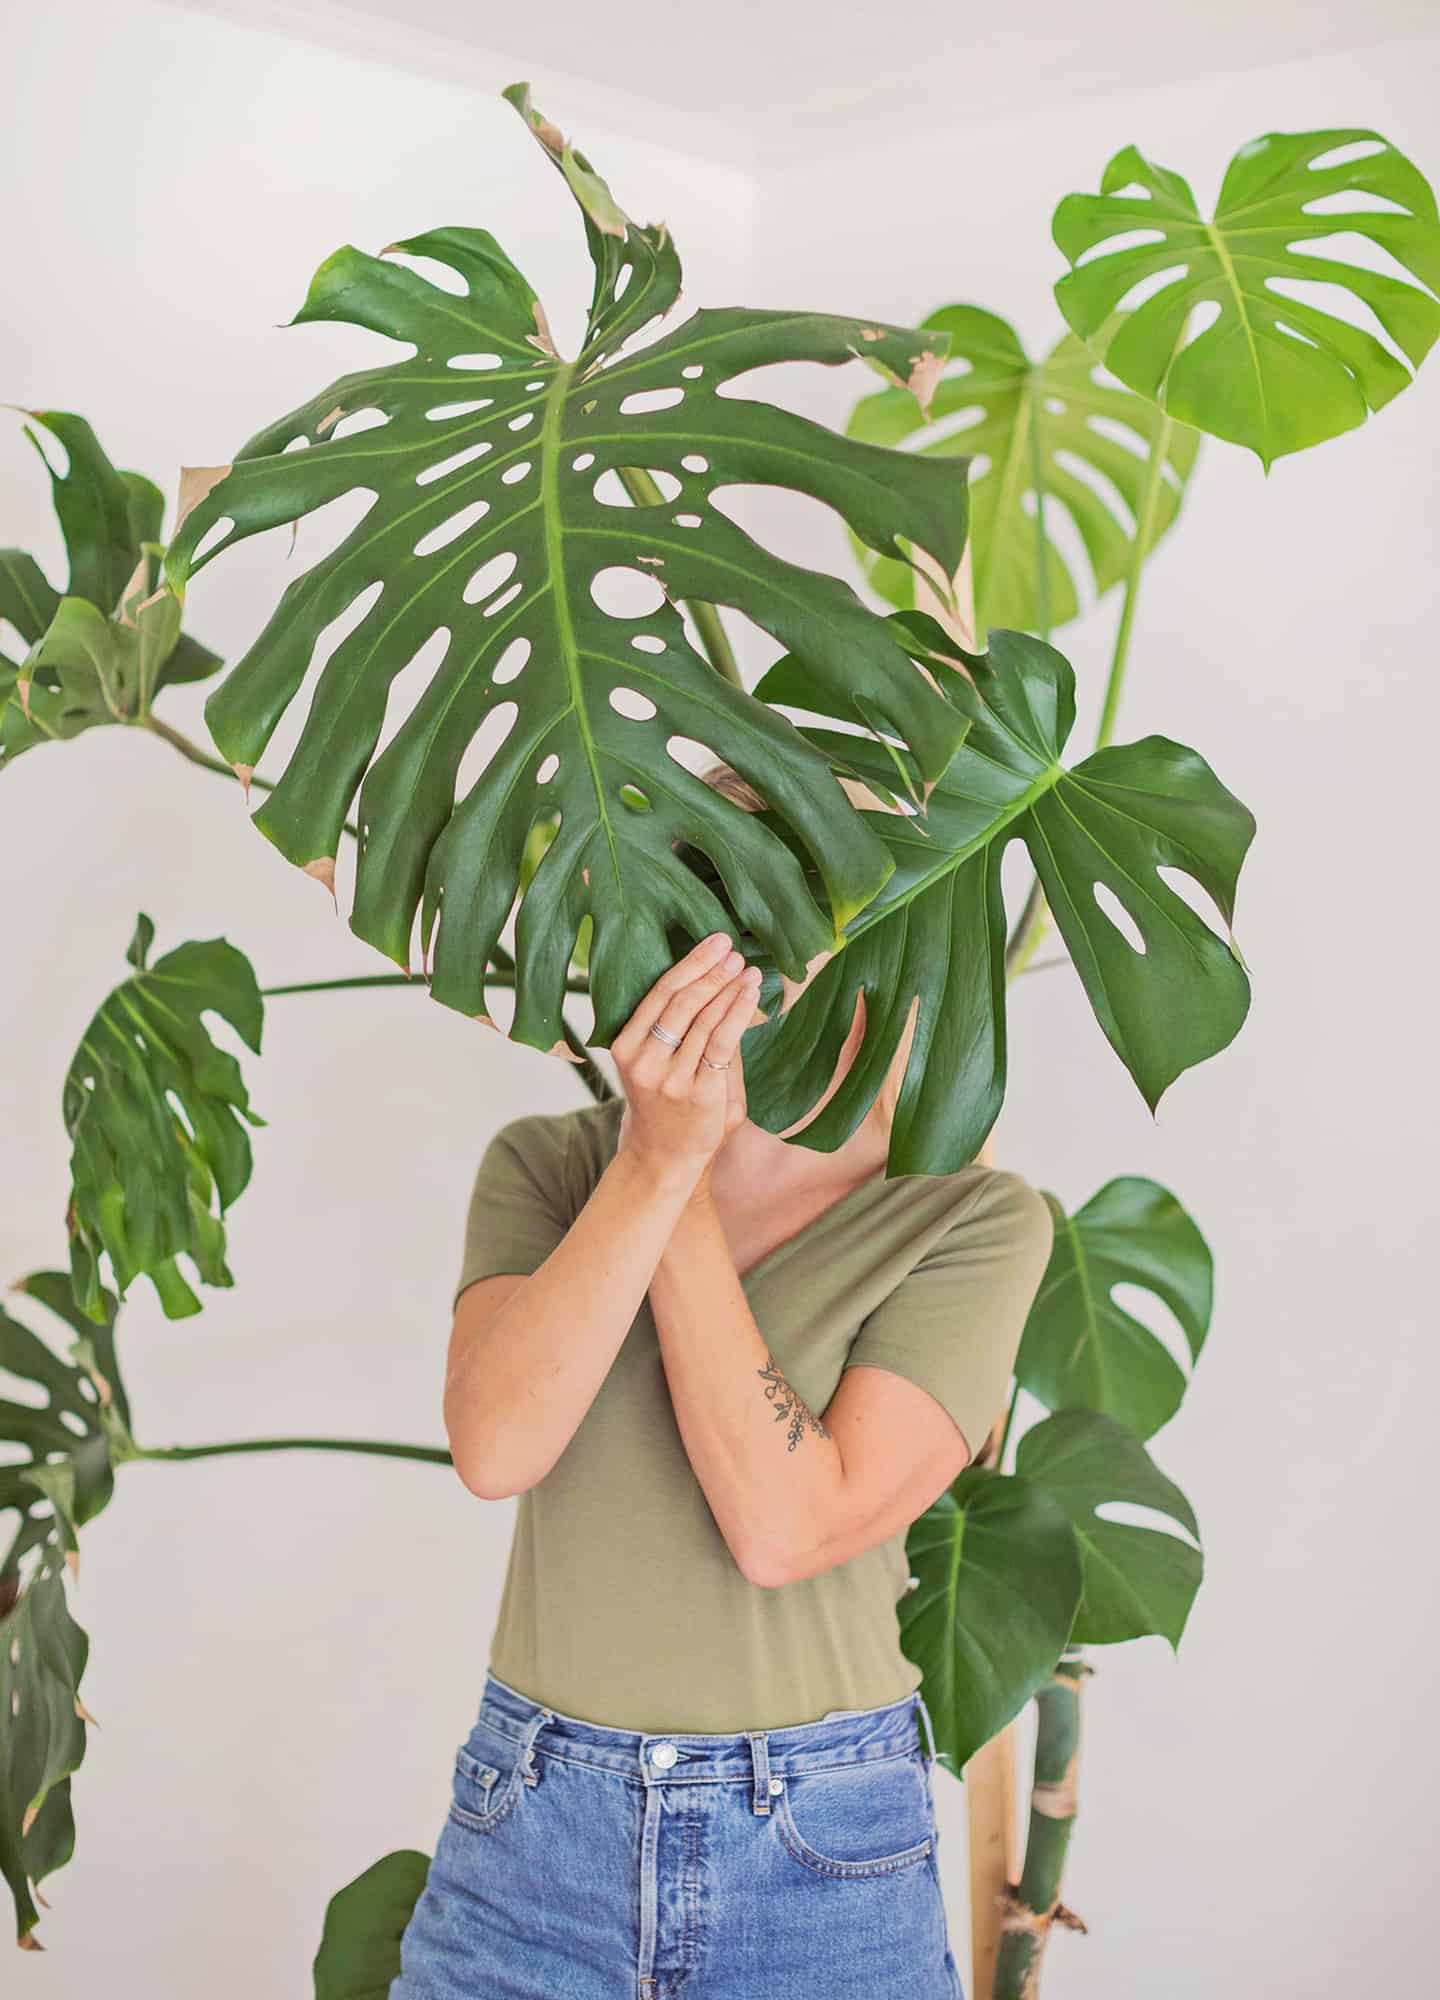 How to Care for Monstera Plants